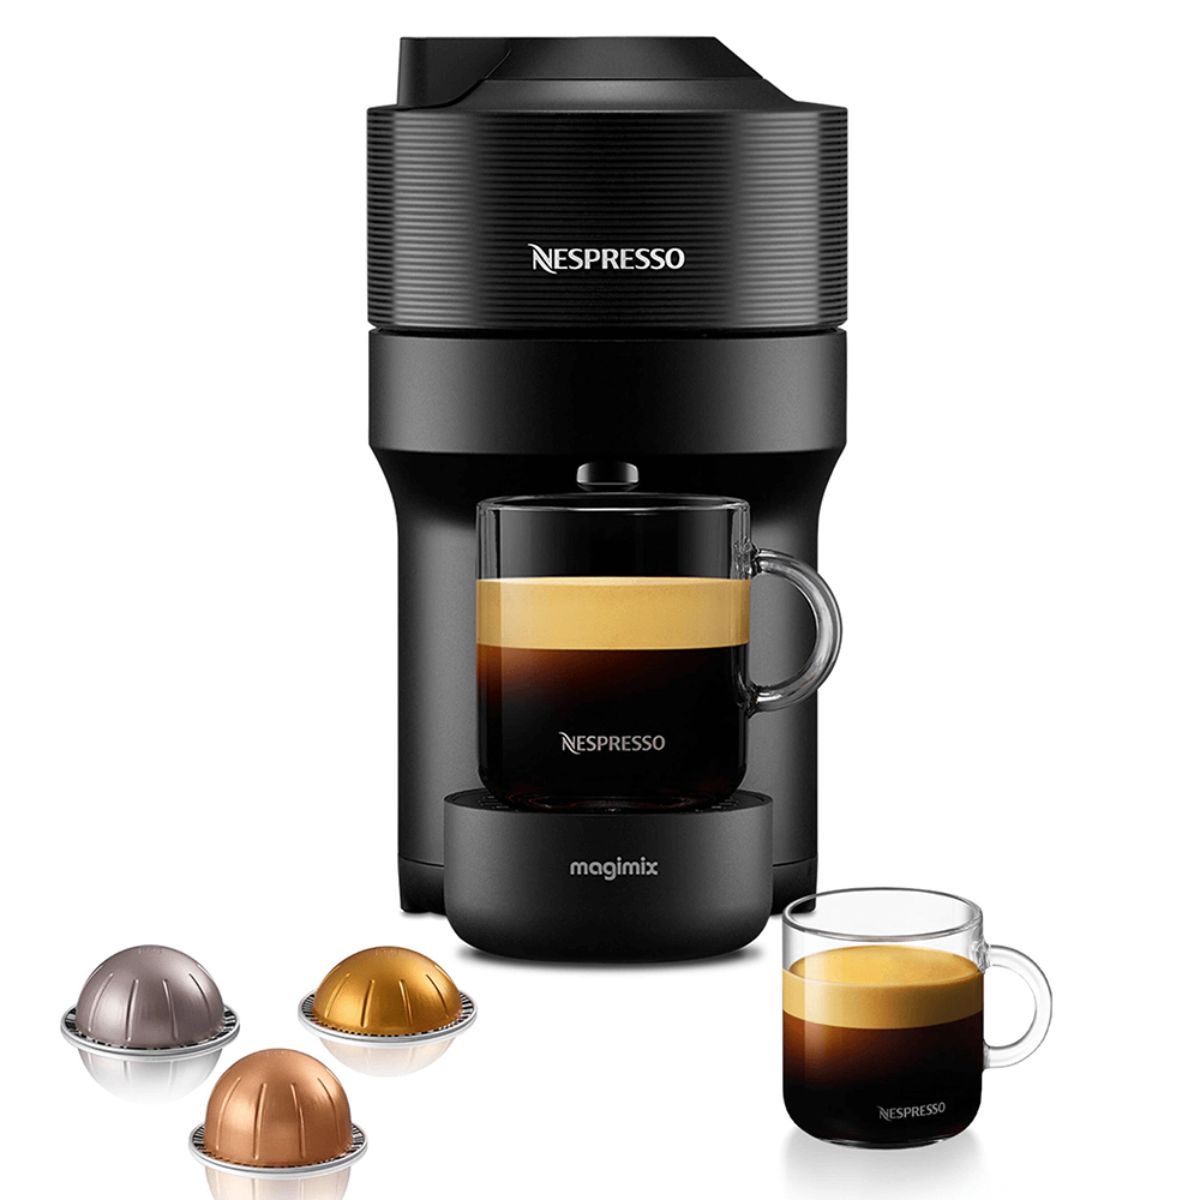 Receive a Nespresso coffee machine free of charge when you spend €/£1,000 online with Würth!